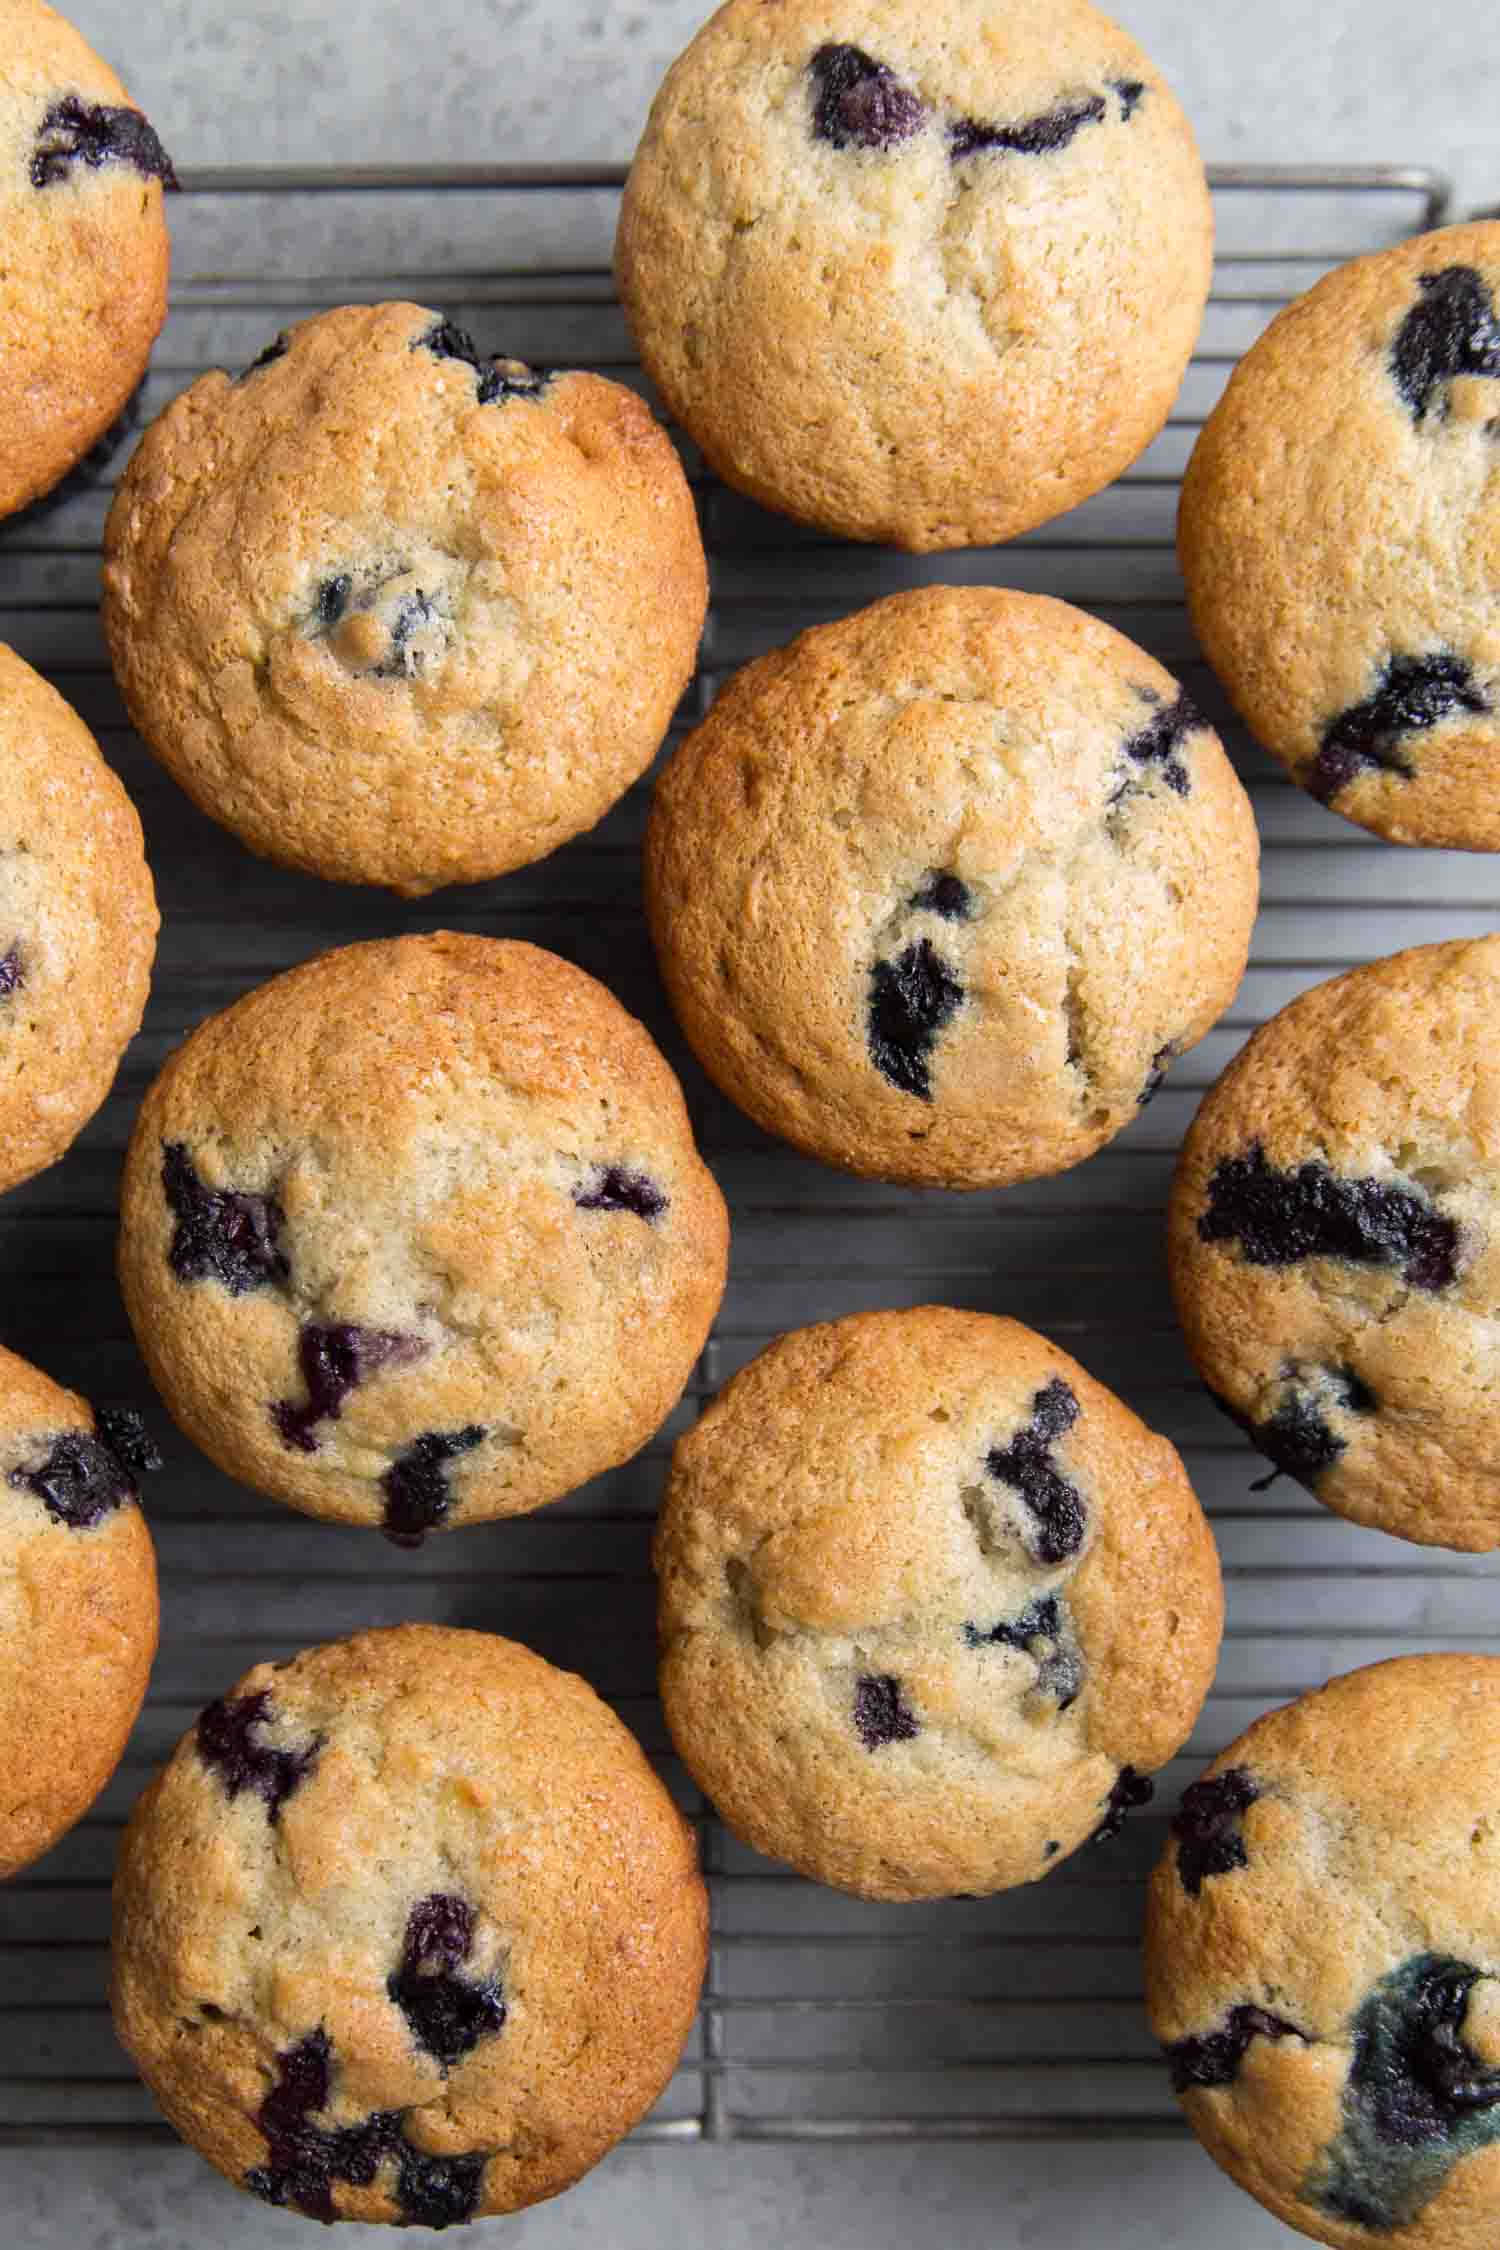 Mouthwatering Blueberry Muffins" Wallpaper